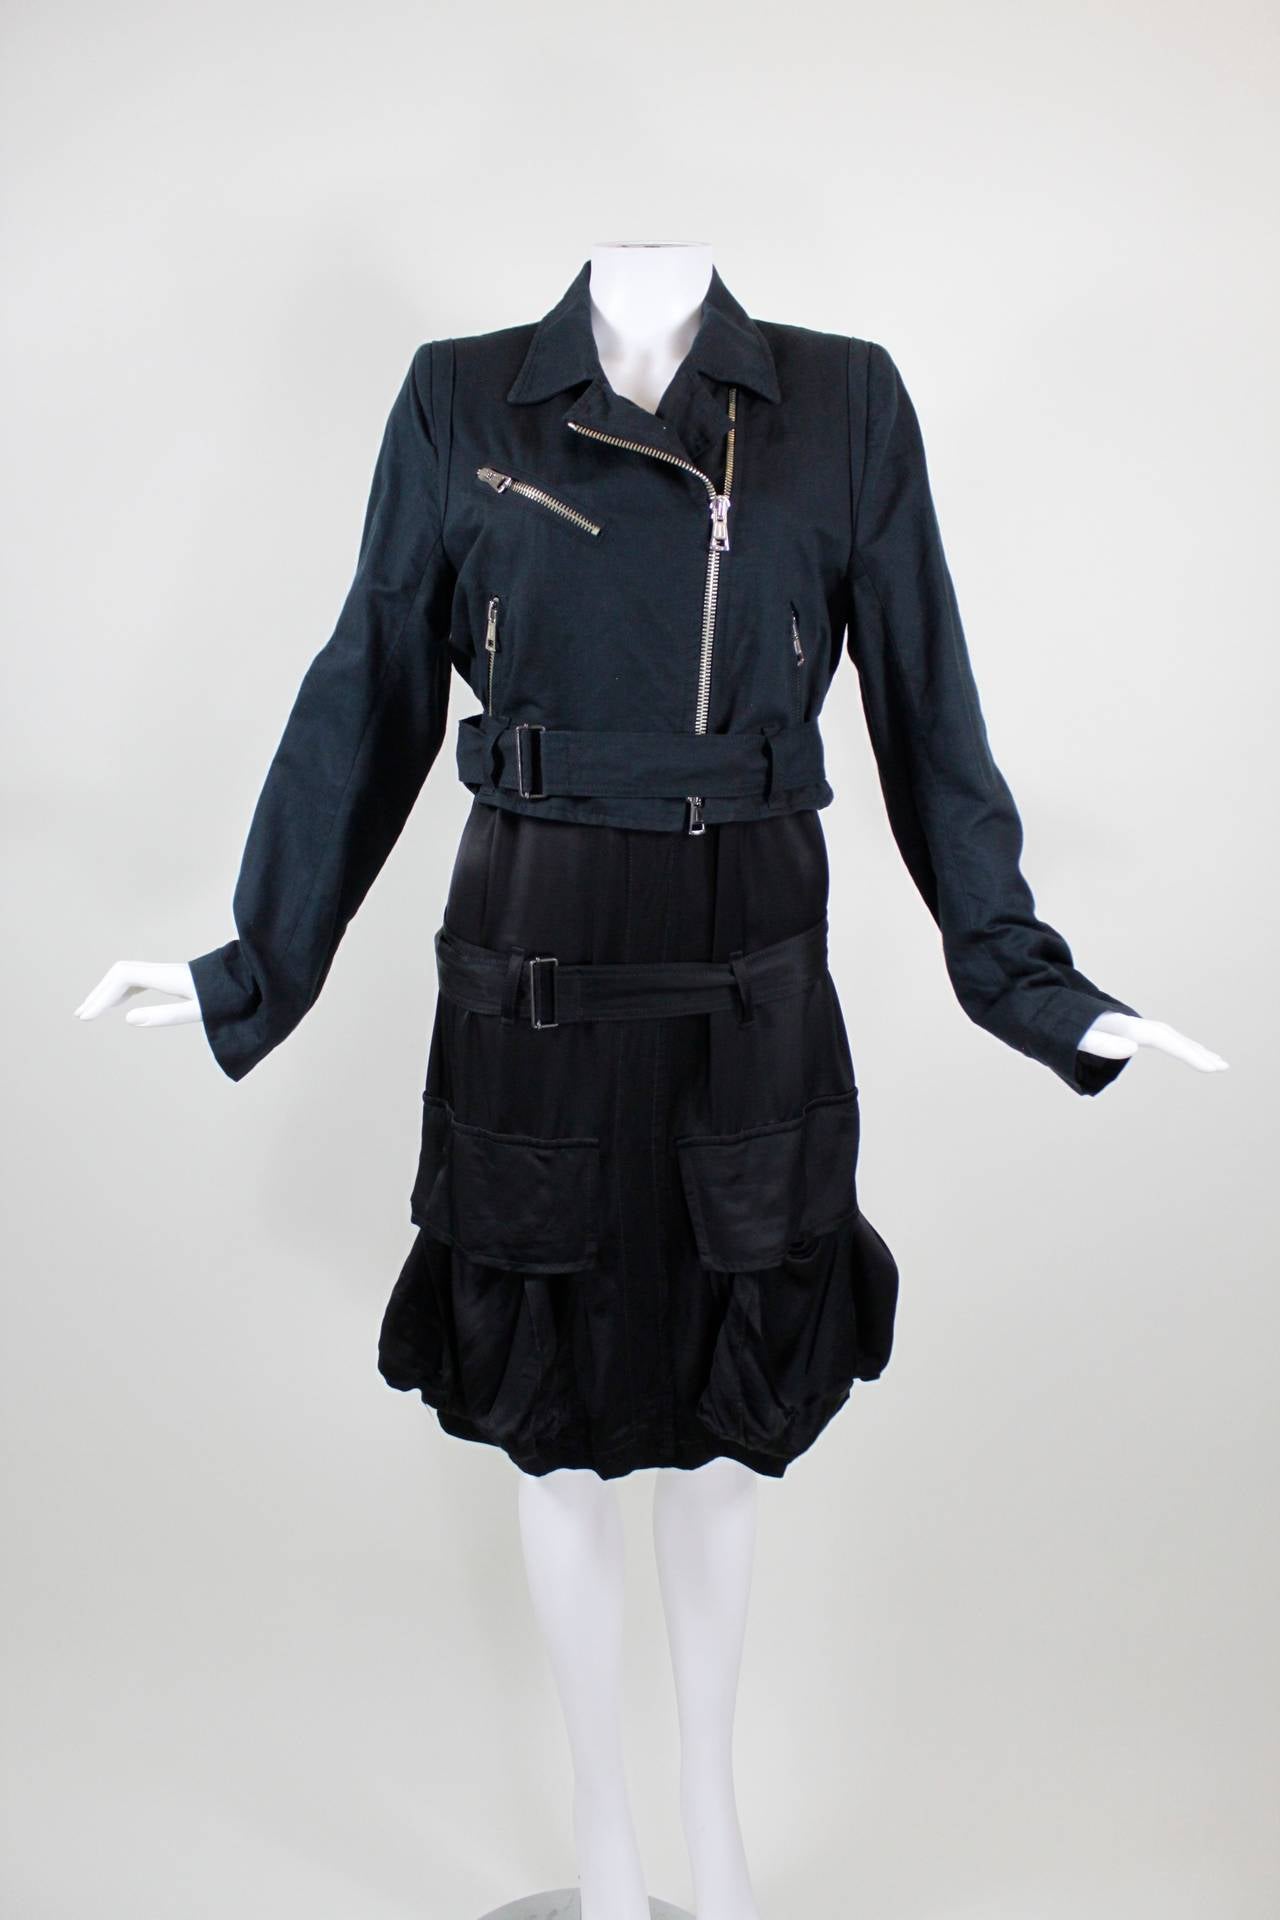 A longline moto jacket from Ann Demeulemeester, featuring a traditional cotton/linen bodice with a rayon tail. The jacket also has two large, functional rayon cargo pockets on front, and an adjustable waist belt and hip belt. Both belts button in